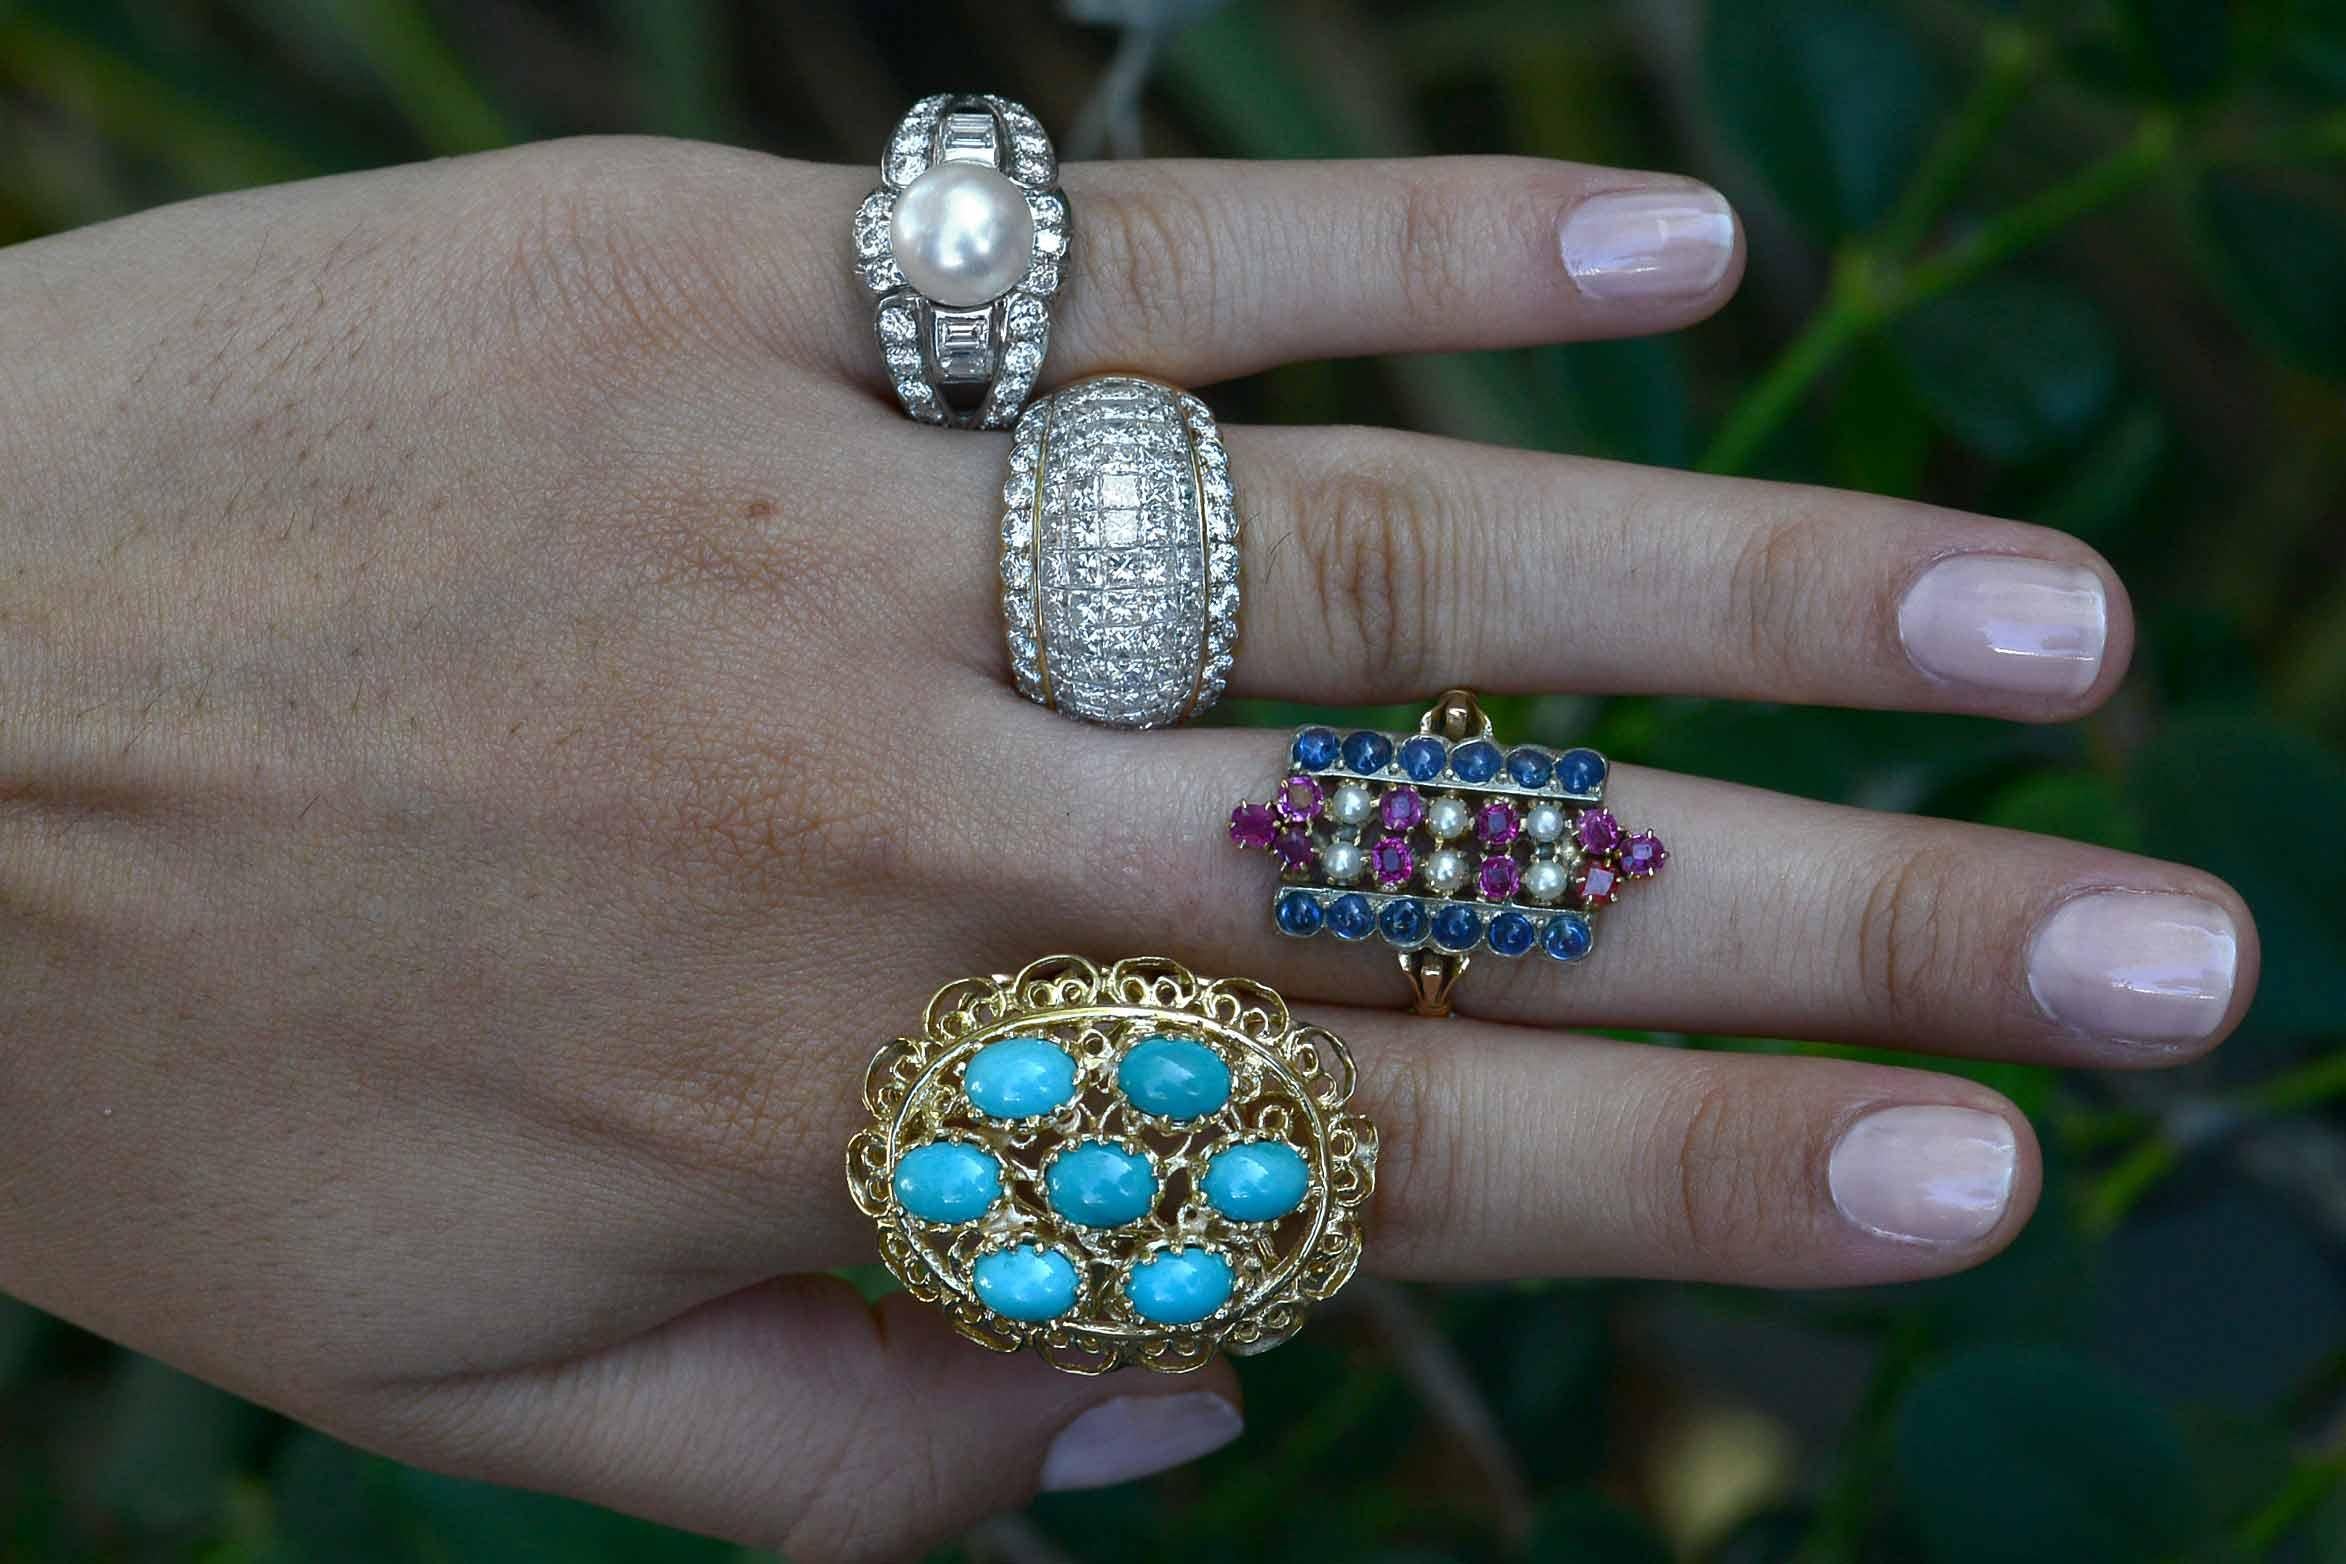 The Bel Air Statement Ring. A most glamorous cocktail ring if there ever was one! A wide, 